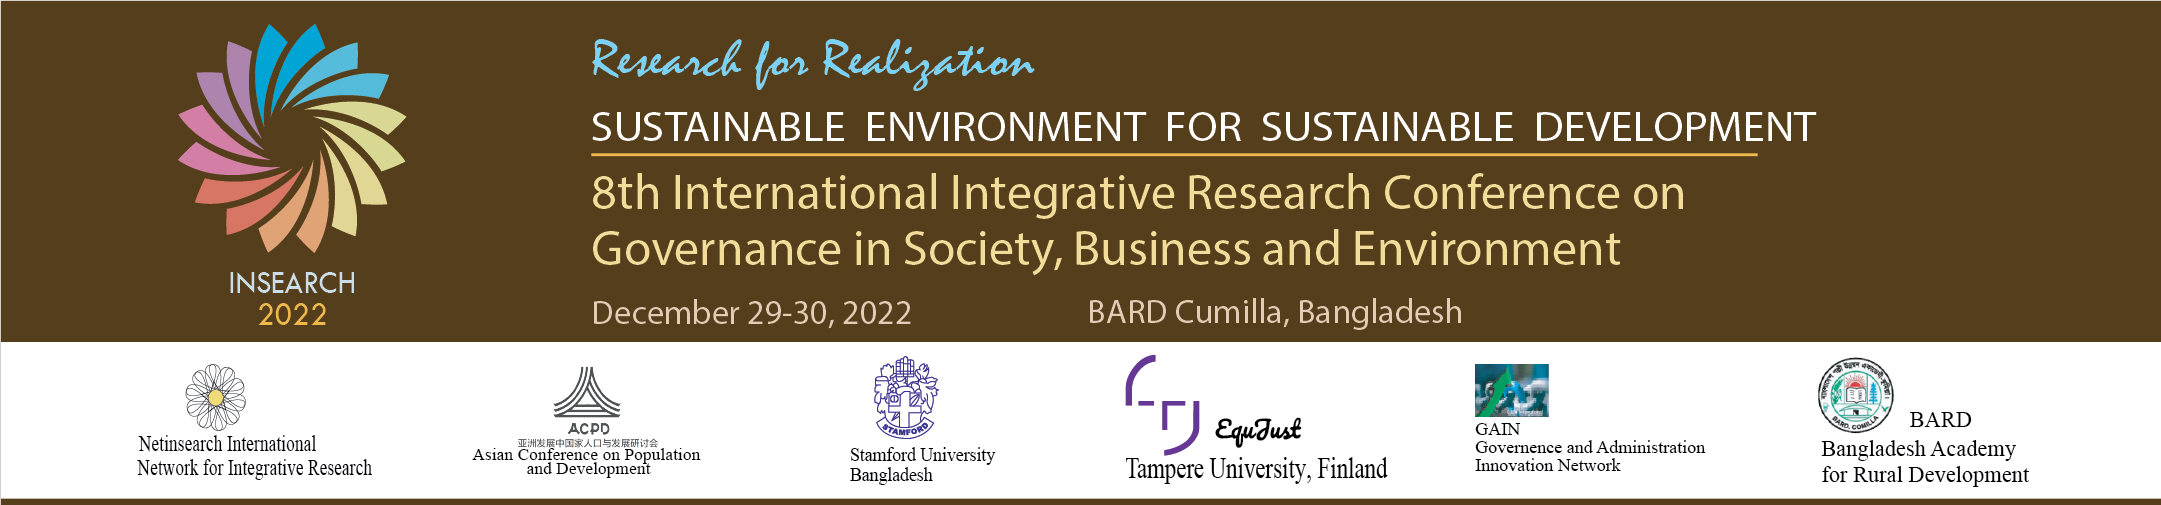 8th International Research Conference on Governance in Society, Business and Environment